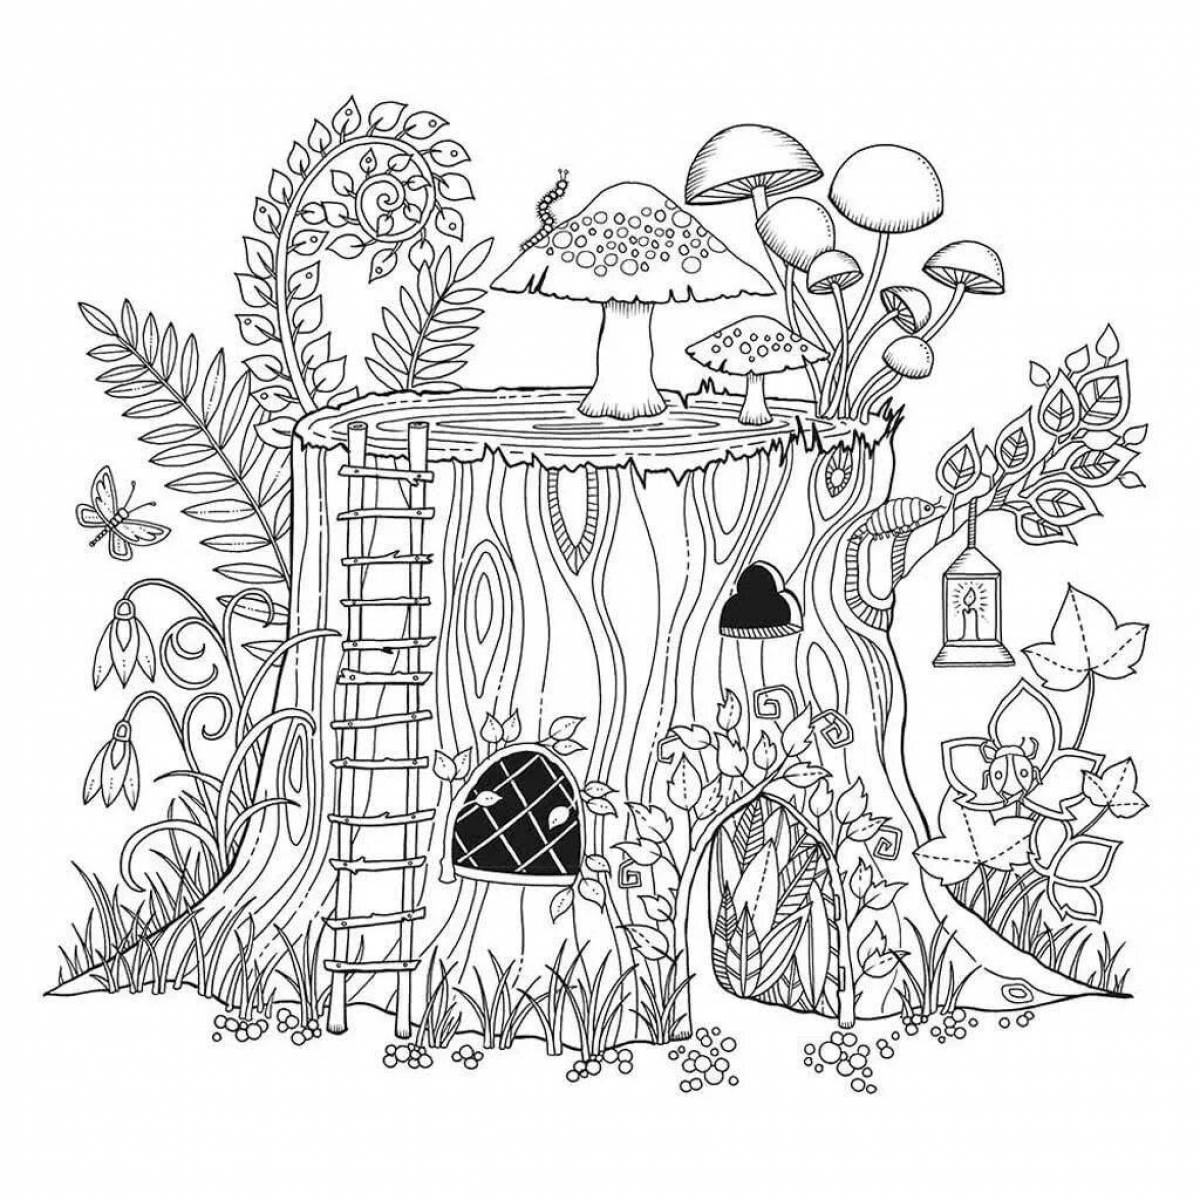 Adorable forest house coloring book